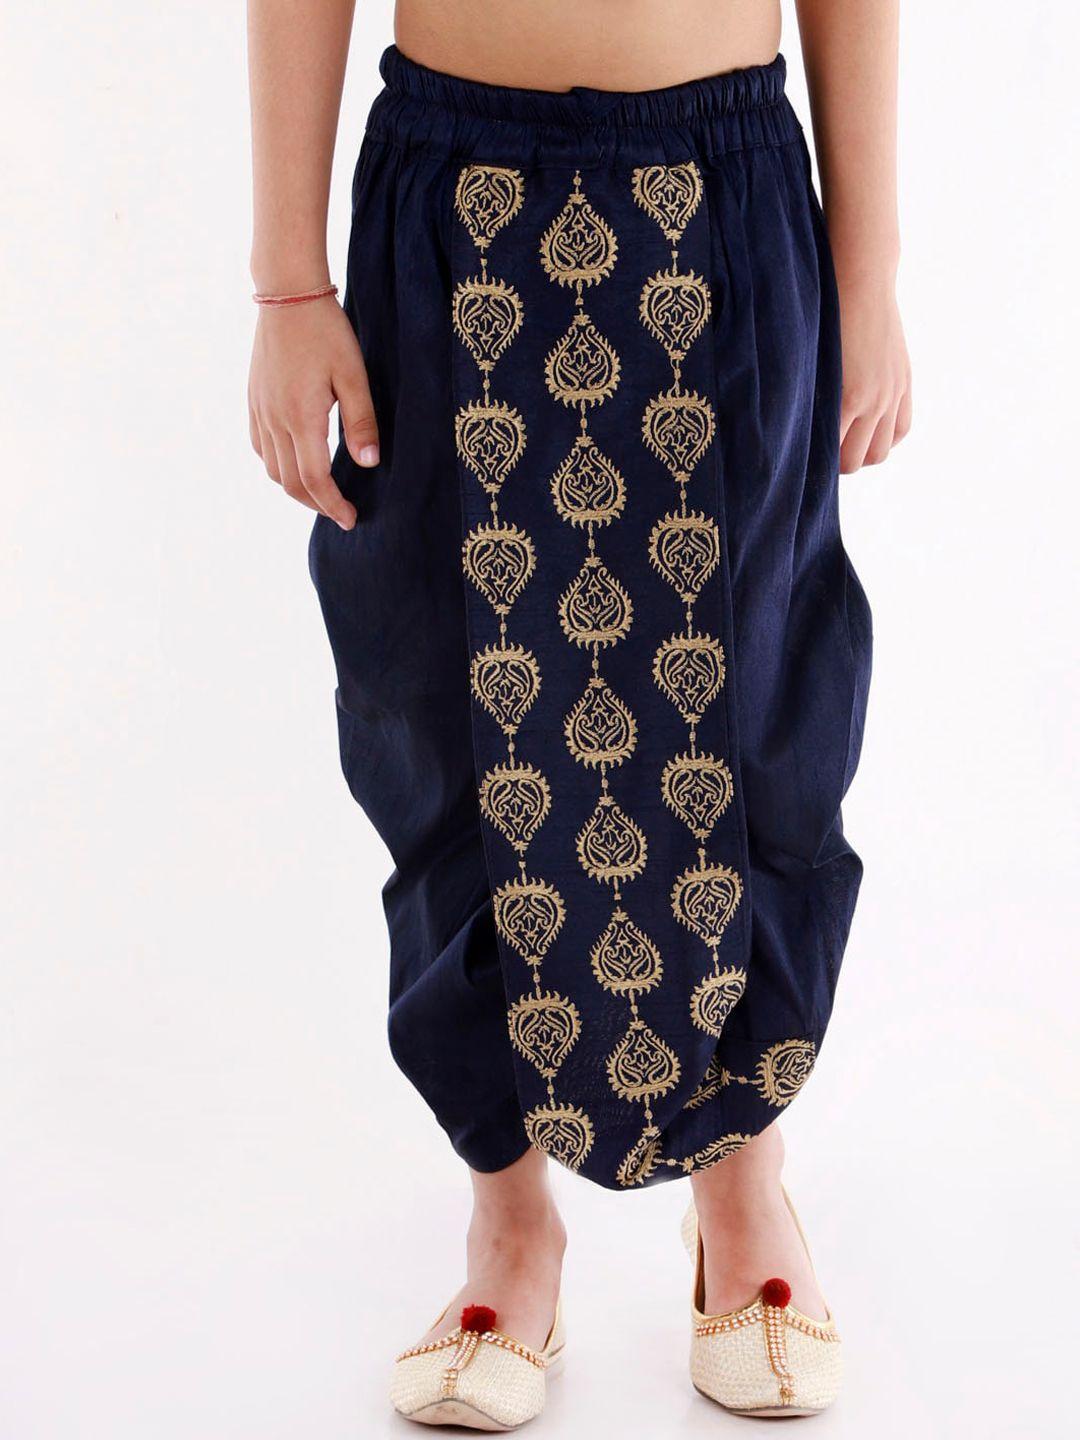 vastramay boys navy blue traditional embroidered dhoti